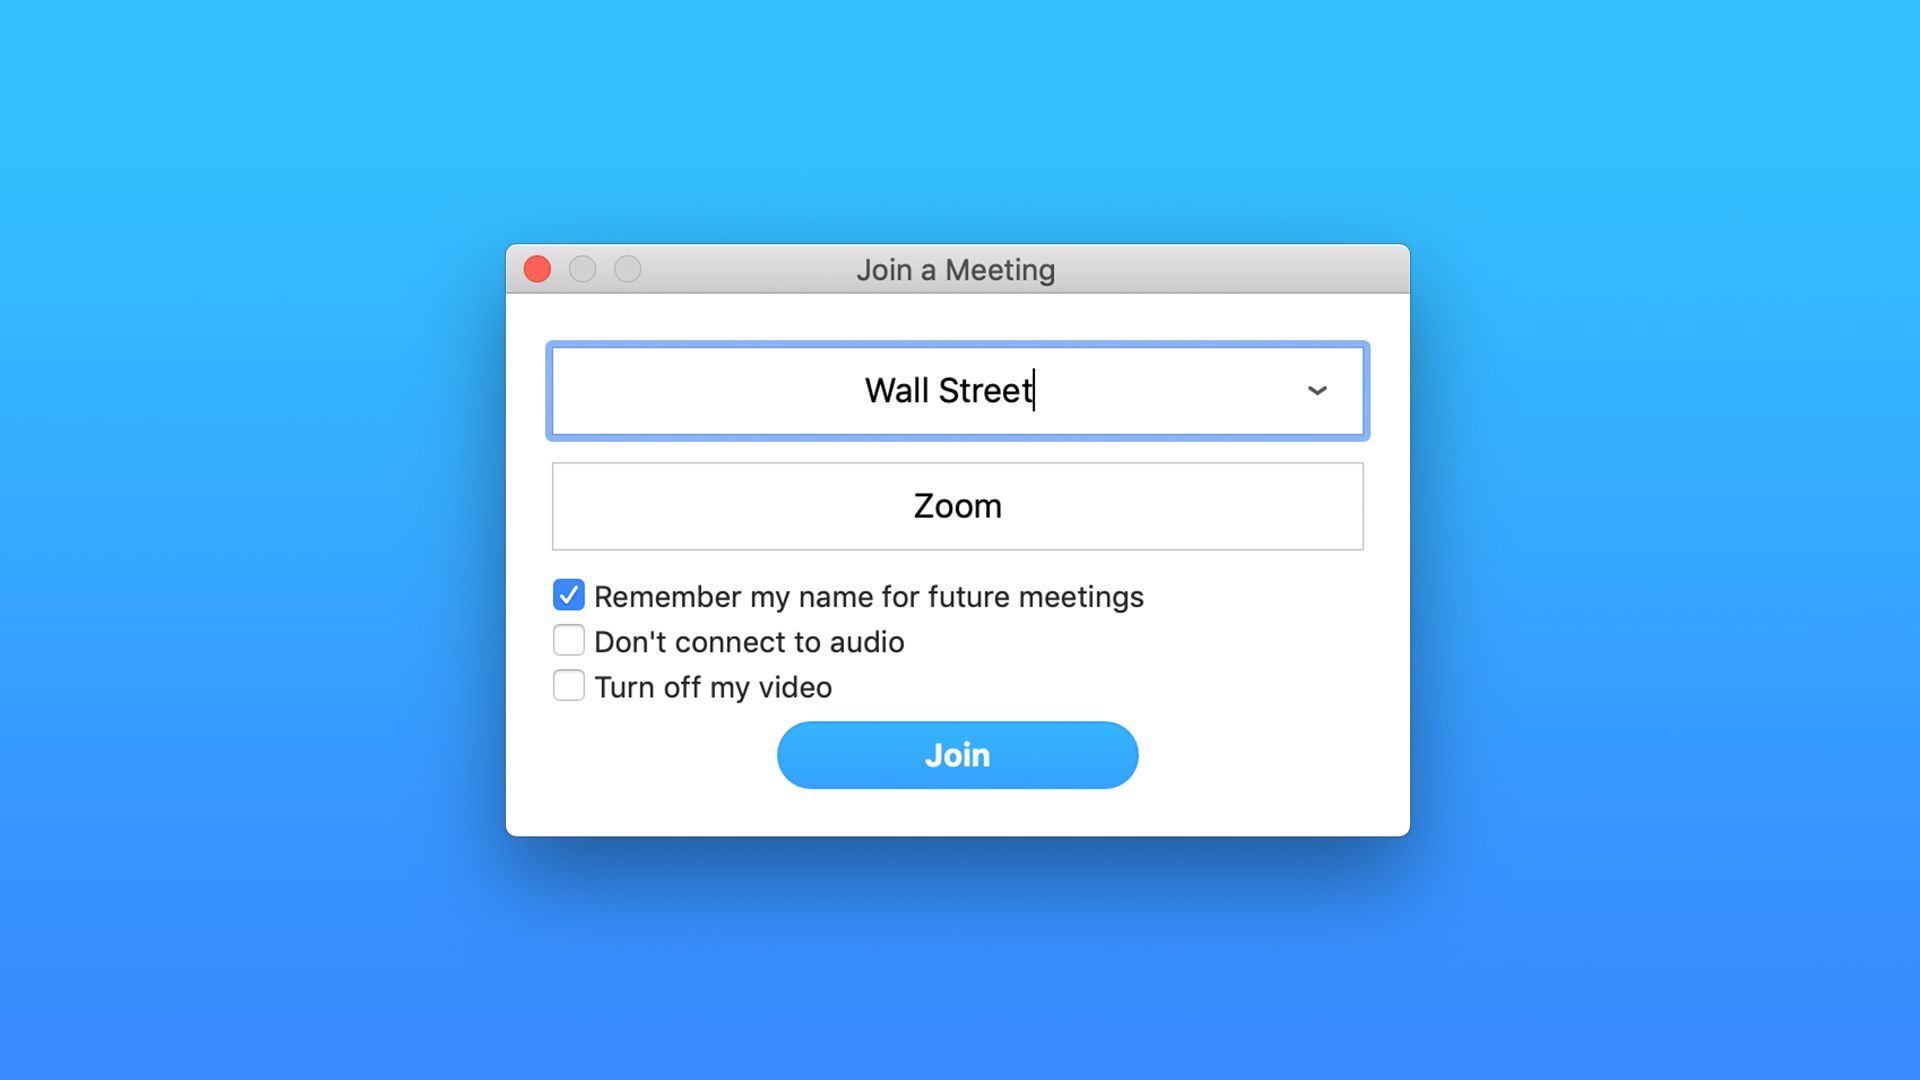 Illustration of Zoom meeting between Zoom and Wall Street